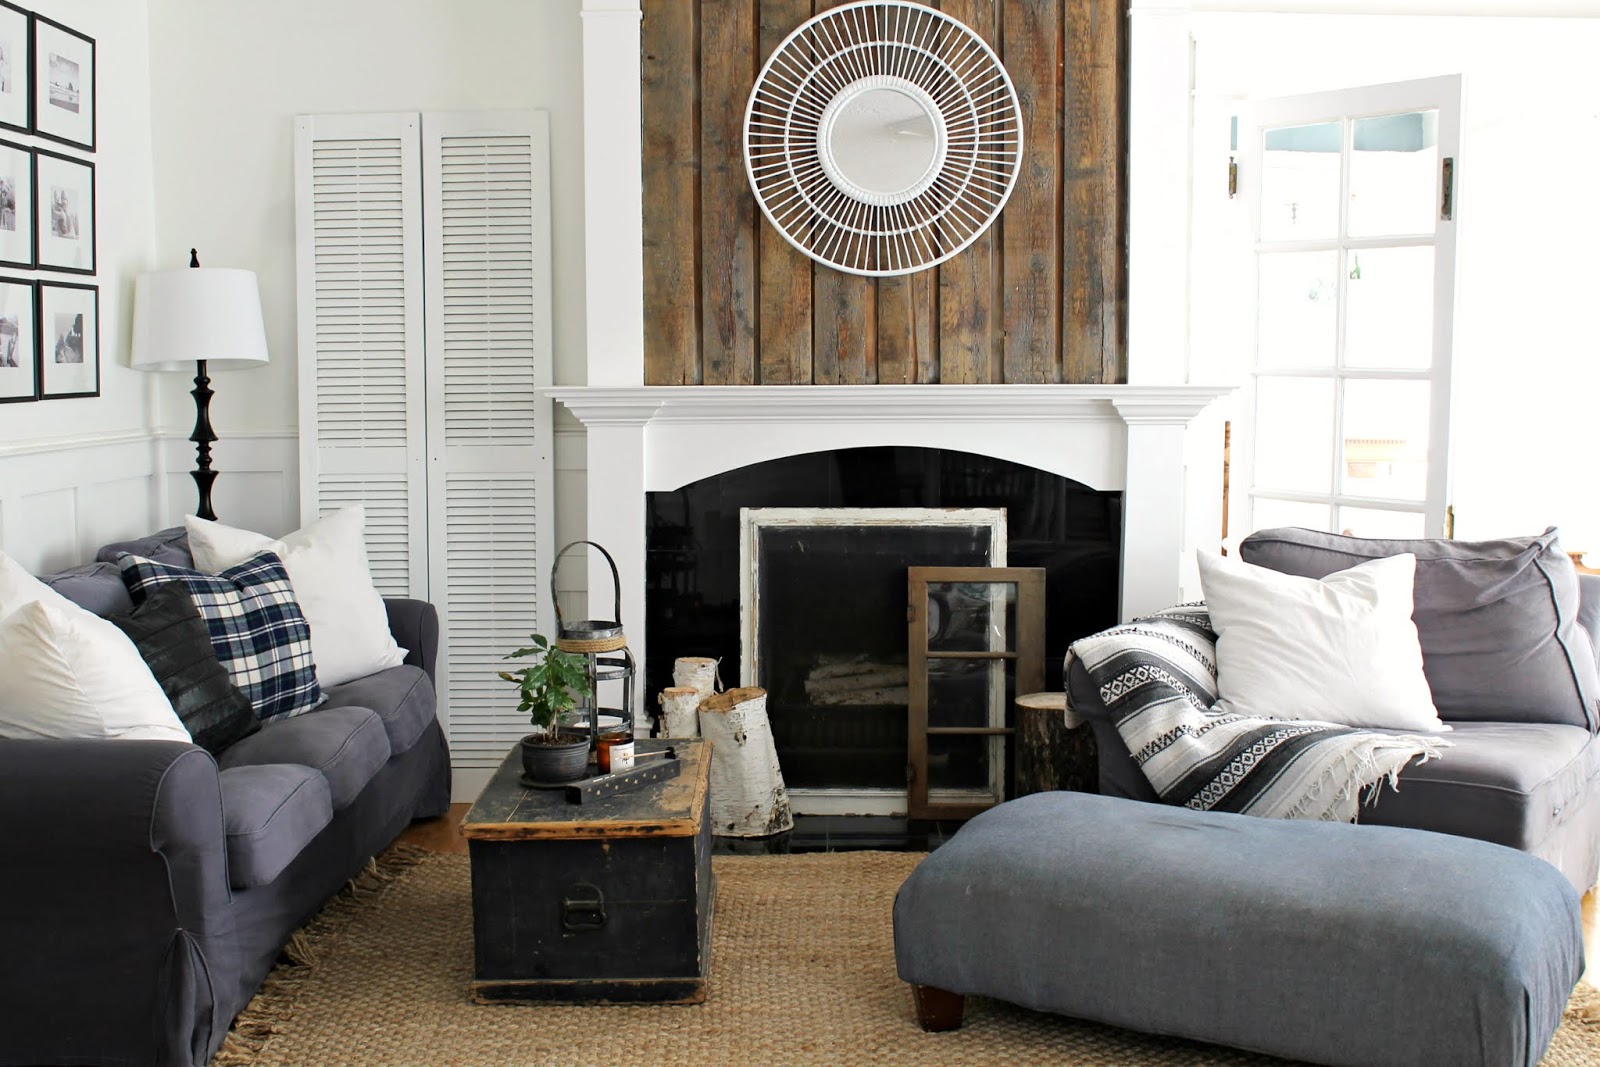 Fireplace Makeover - Rustic Wood Planks on Fireplace